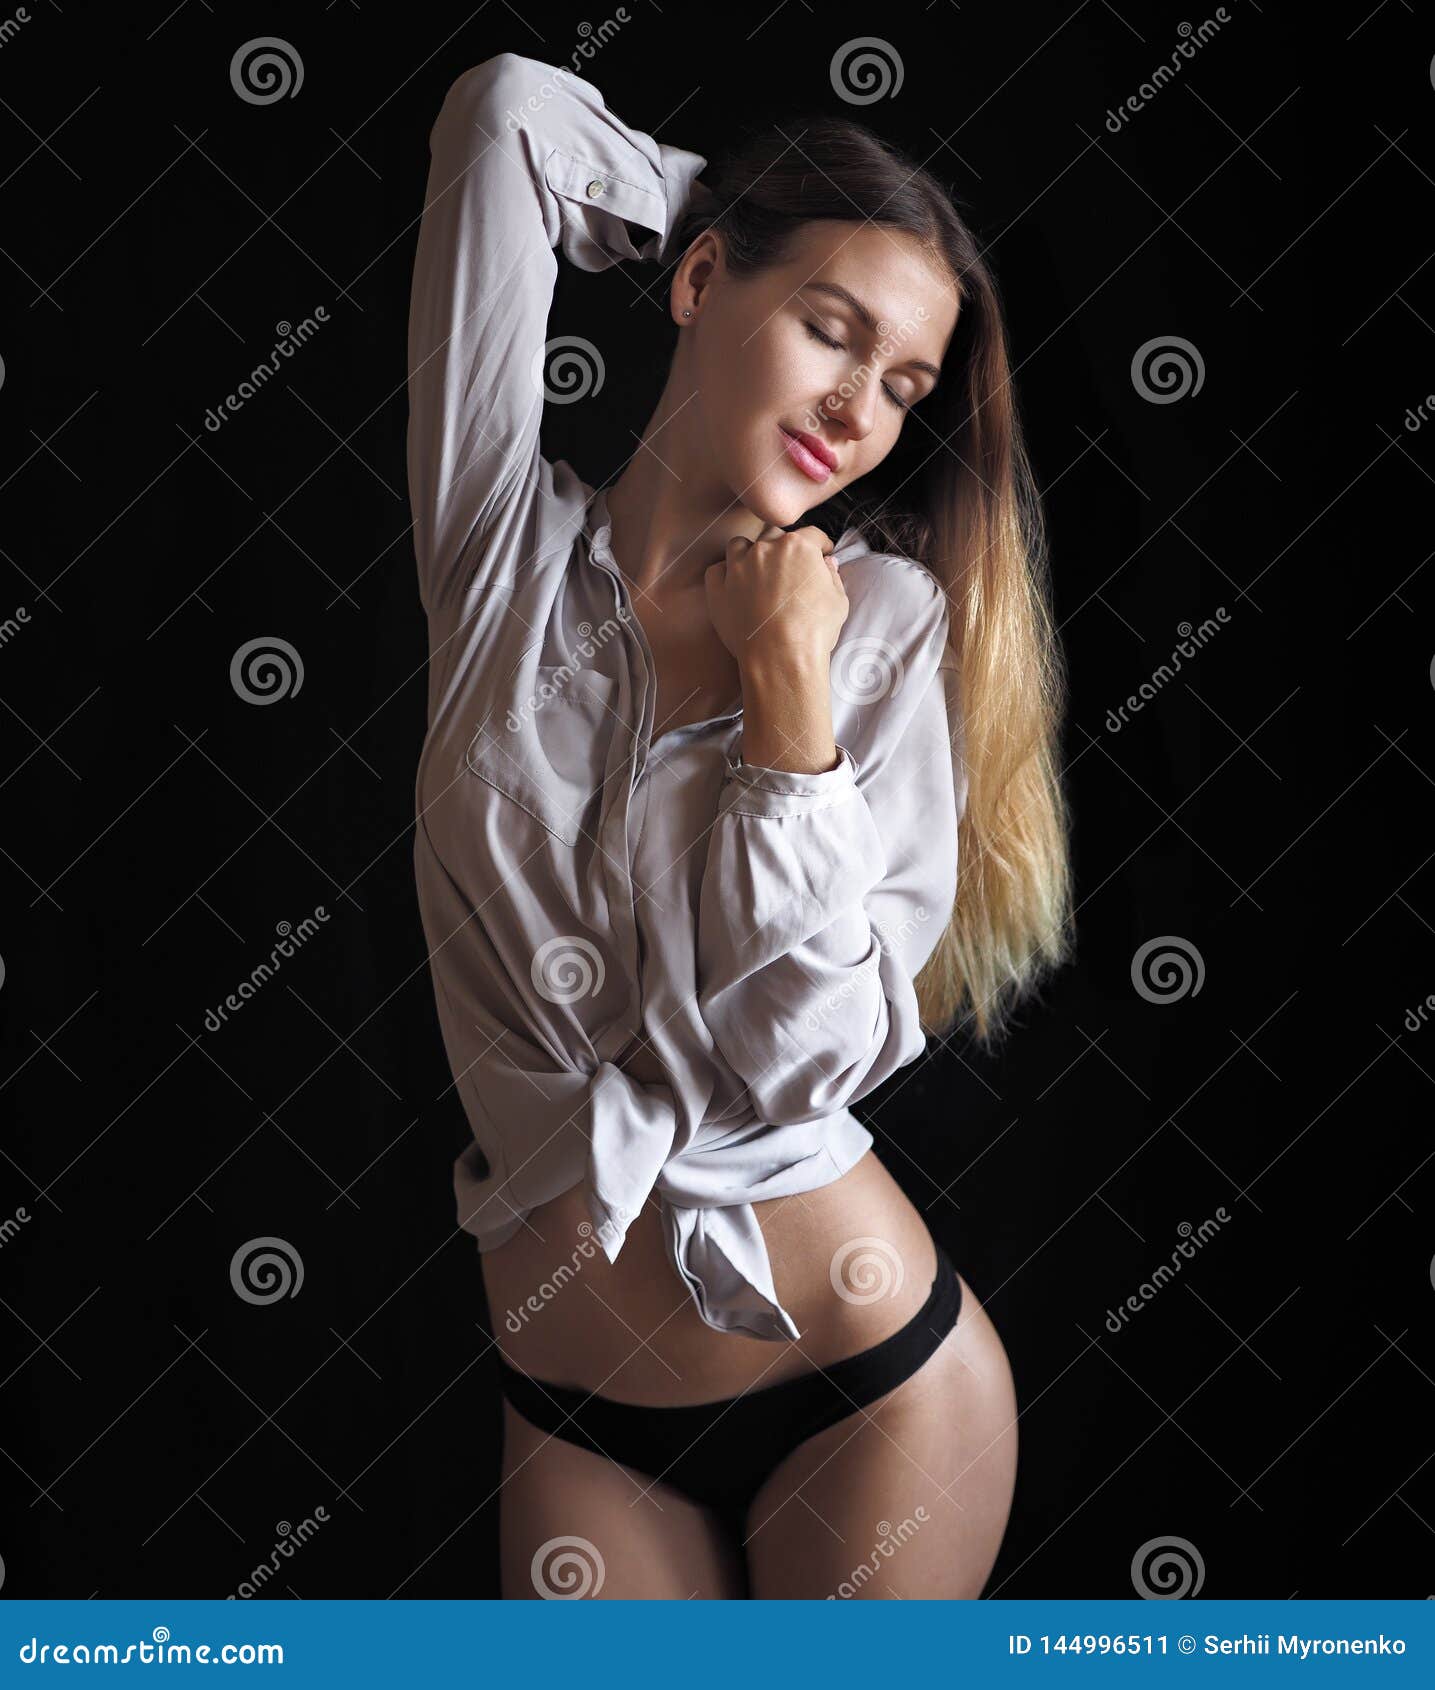 Young Girl Posing at Underwear Isolated at Black Stock Image photo